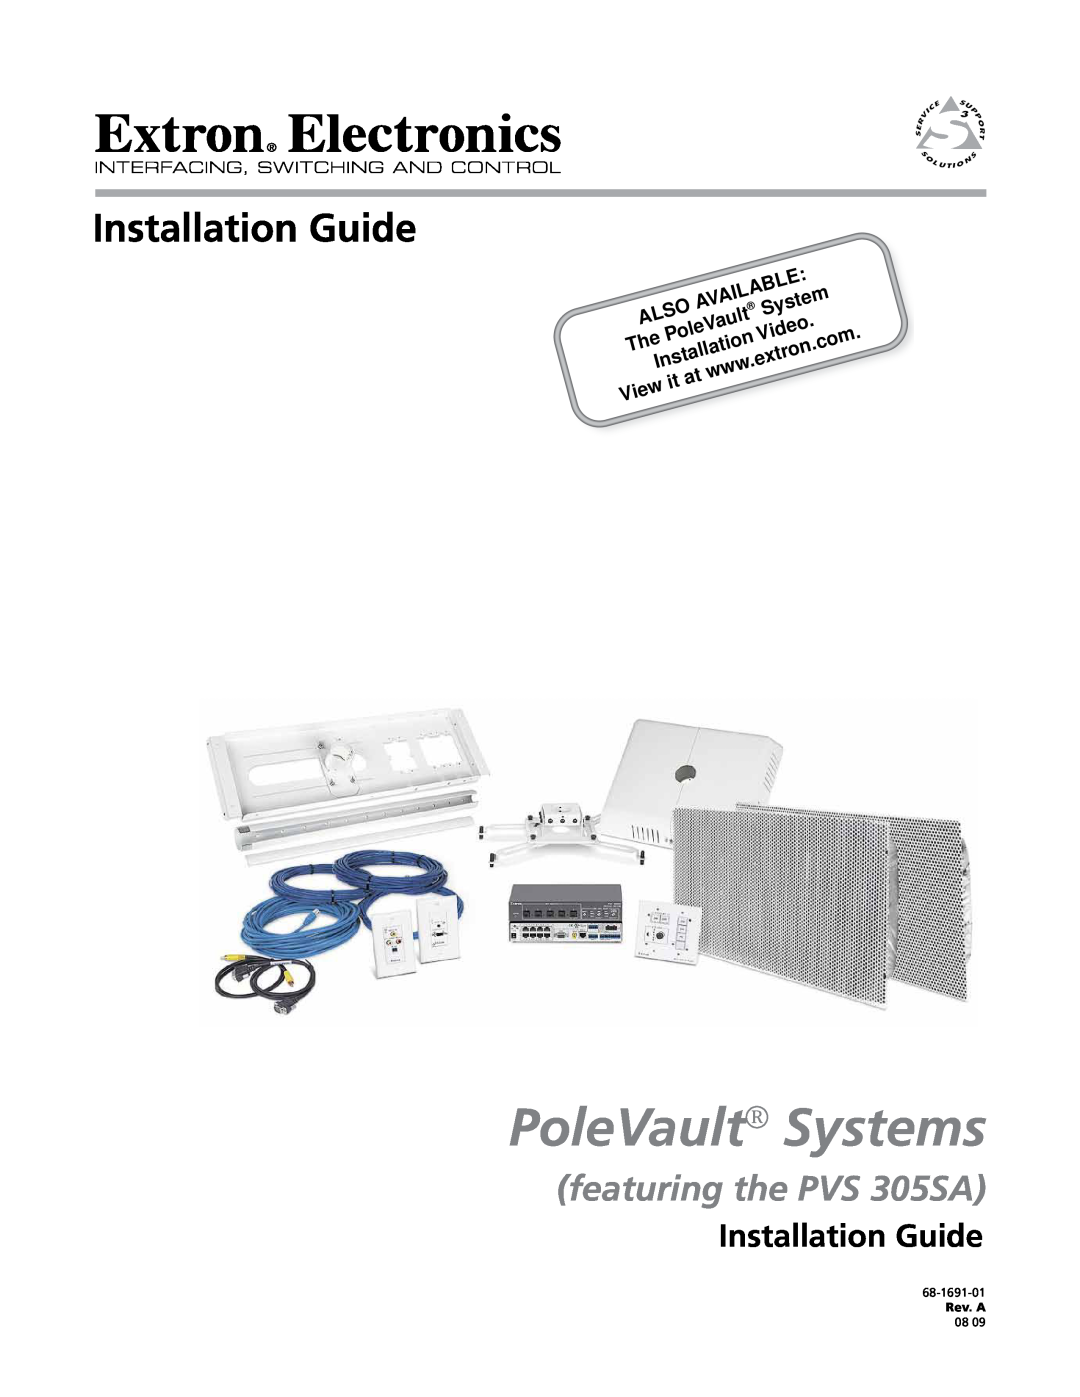 Extron electronic manual Installation Guide, PoleVault Systems, featuring the PVS 305SA, Ailable, Also, extron, itat 